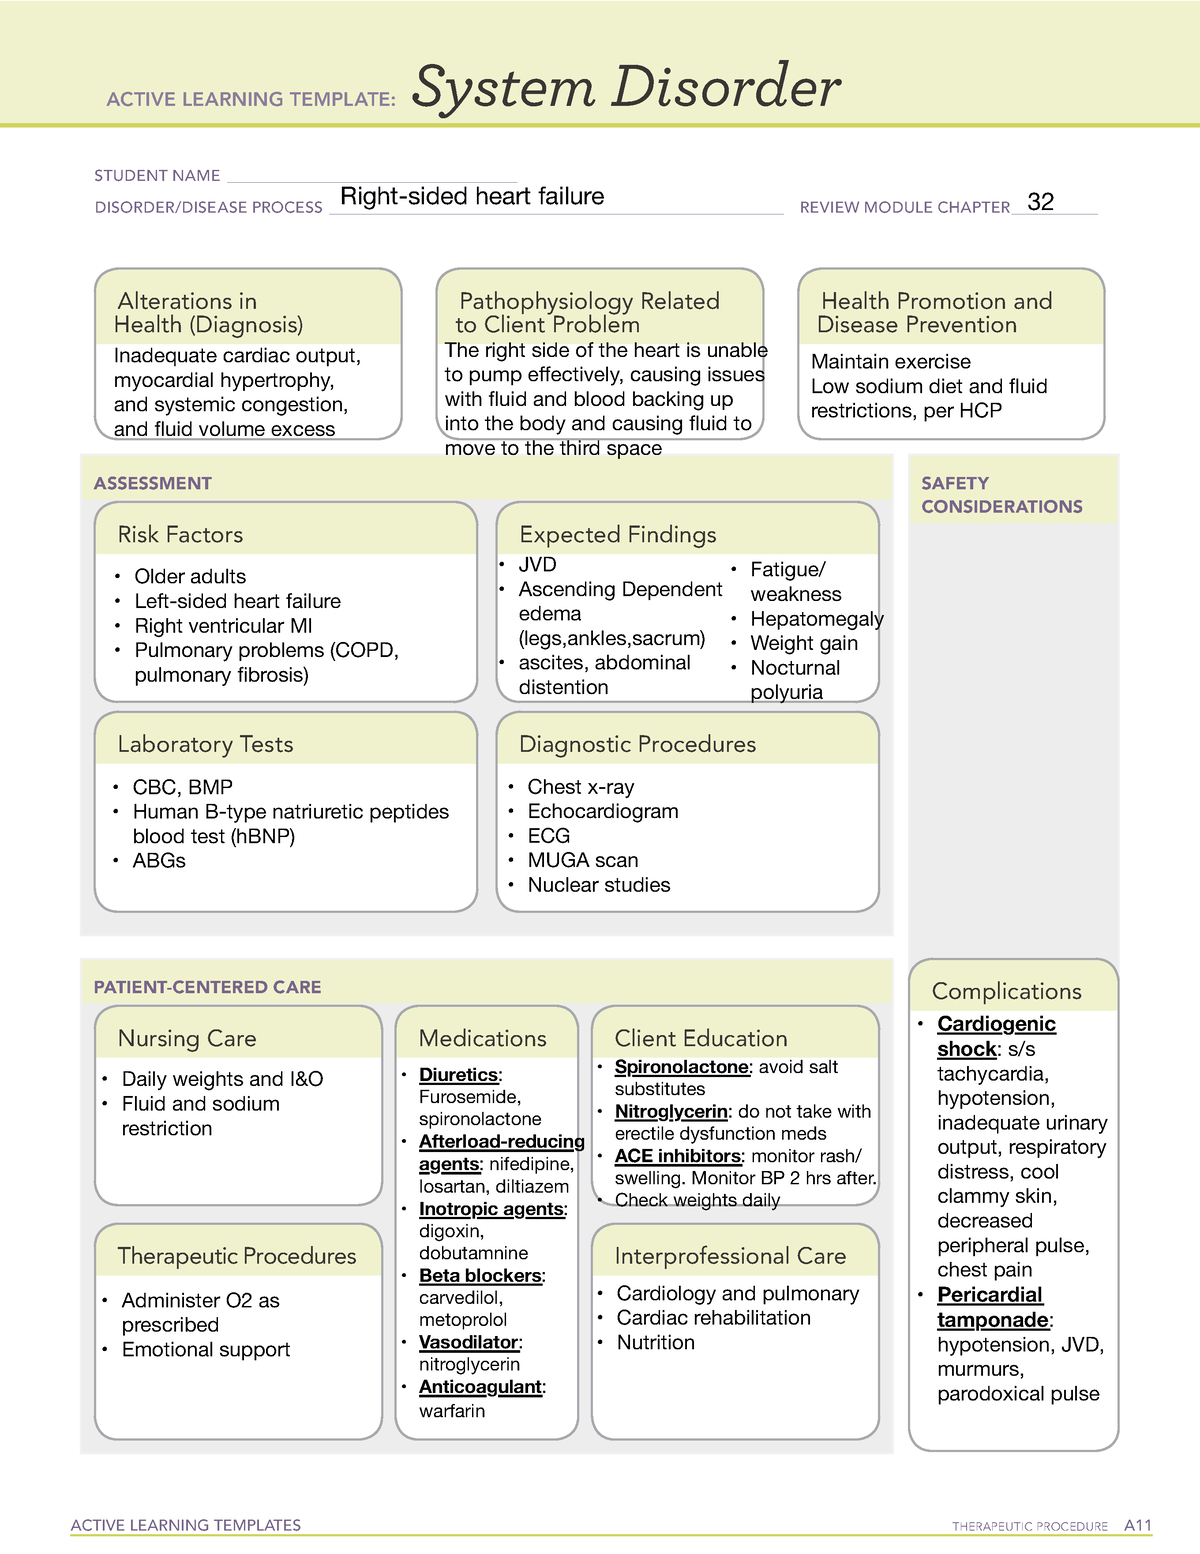 System Disorder template active learning template right sided heart